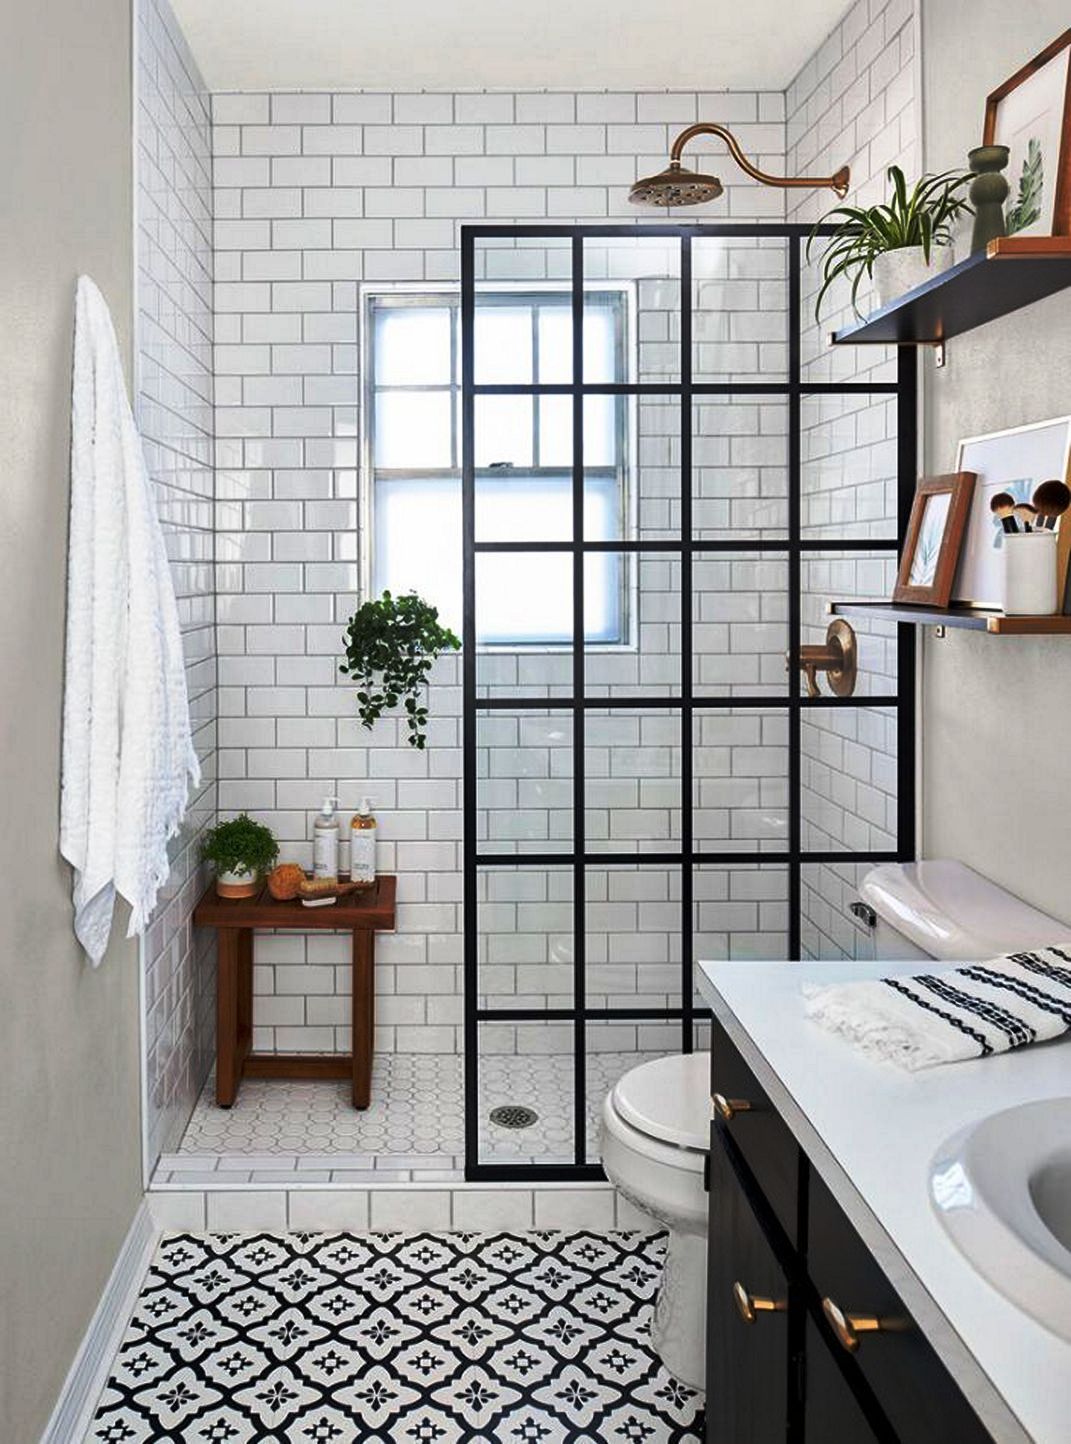 Bathroom remodeling ideas that will work for your home in New Year 2021 1